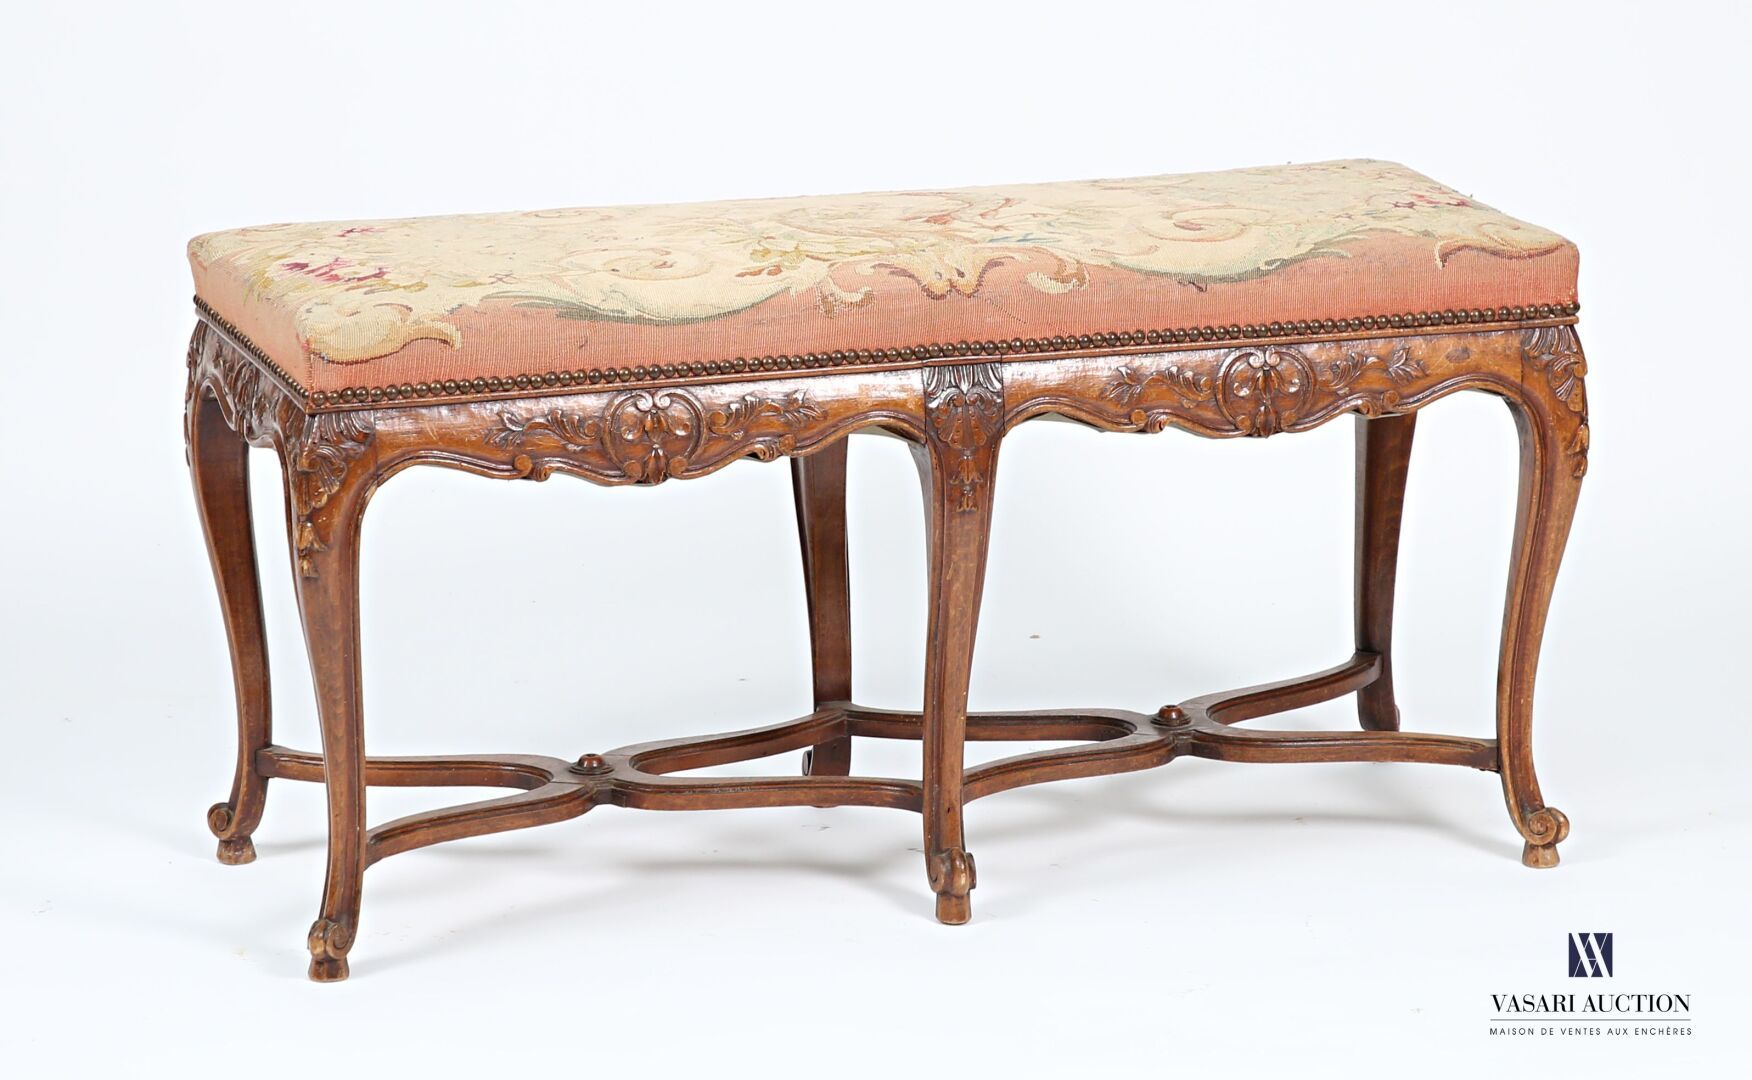 Null Bench seat in natural wood, molded and carved with flowers and foliage. The&hellip;